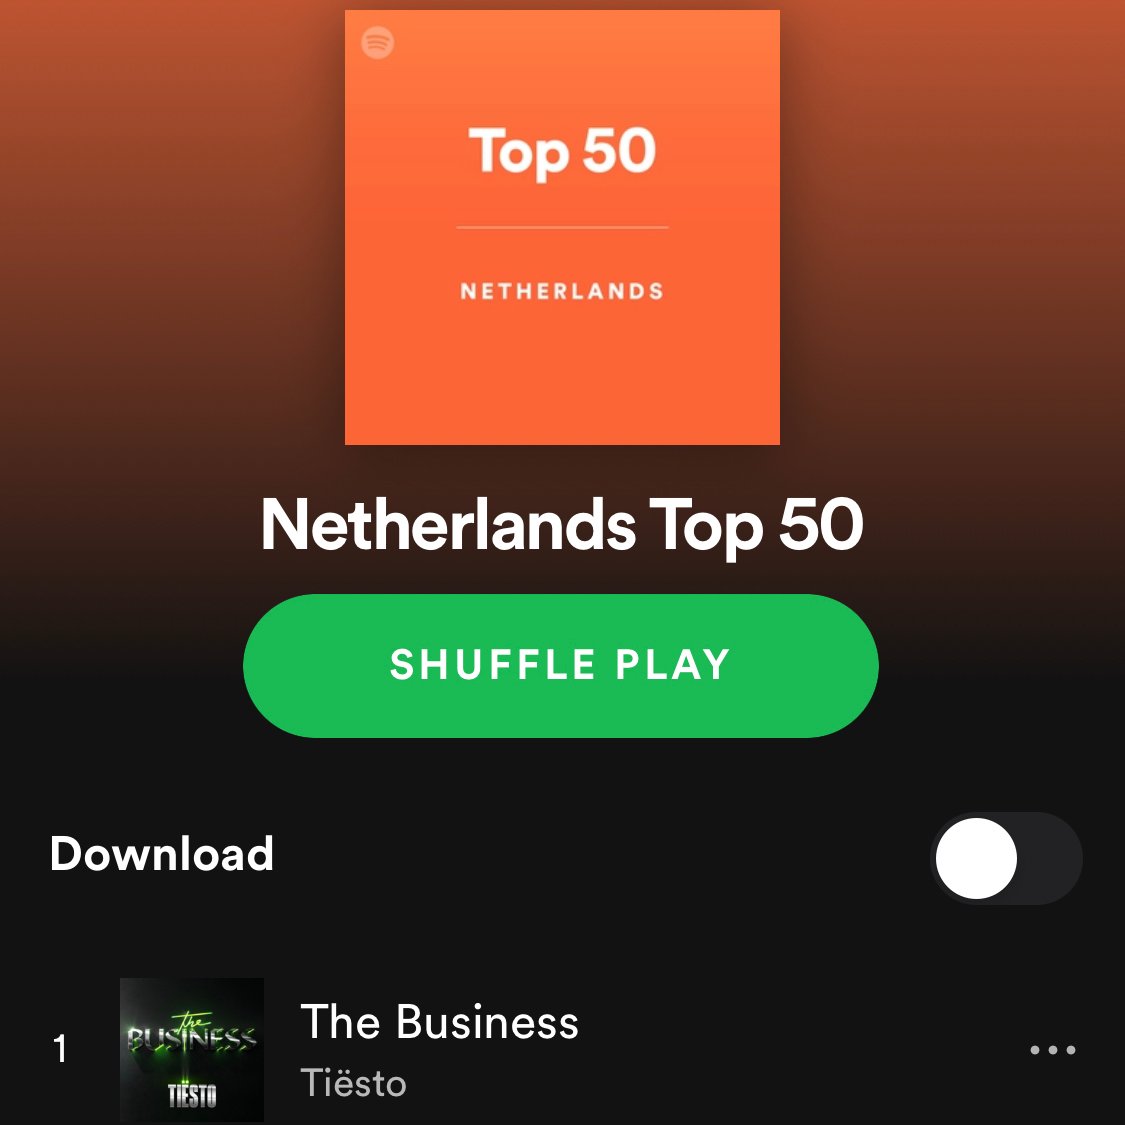 Thank you 🇳🇱 for making The Business no 1 on @SpotifyNL  !! @Spotify 
 